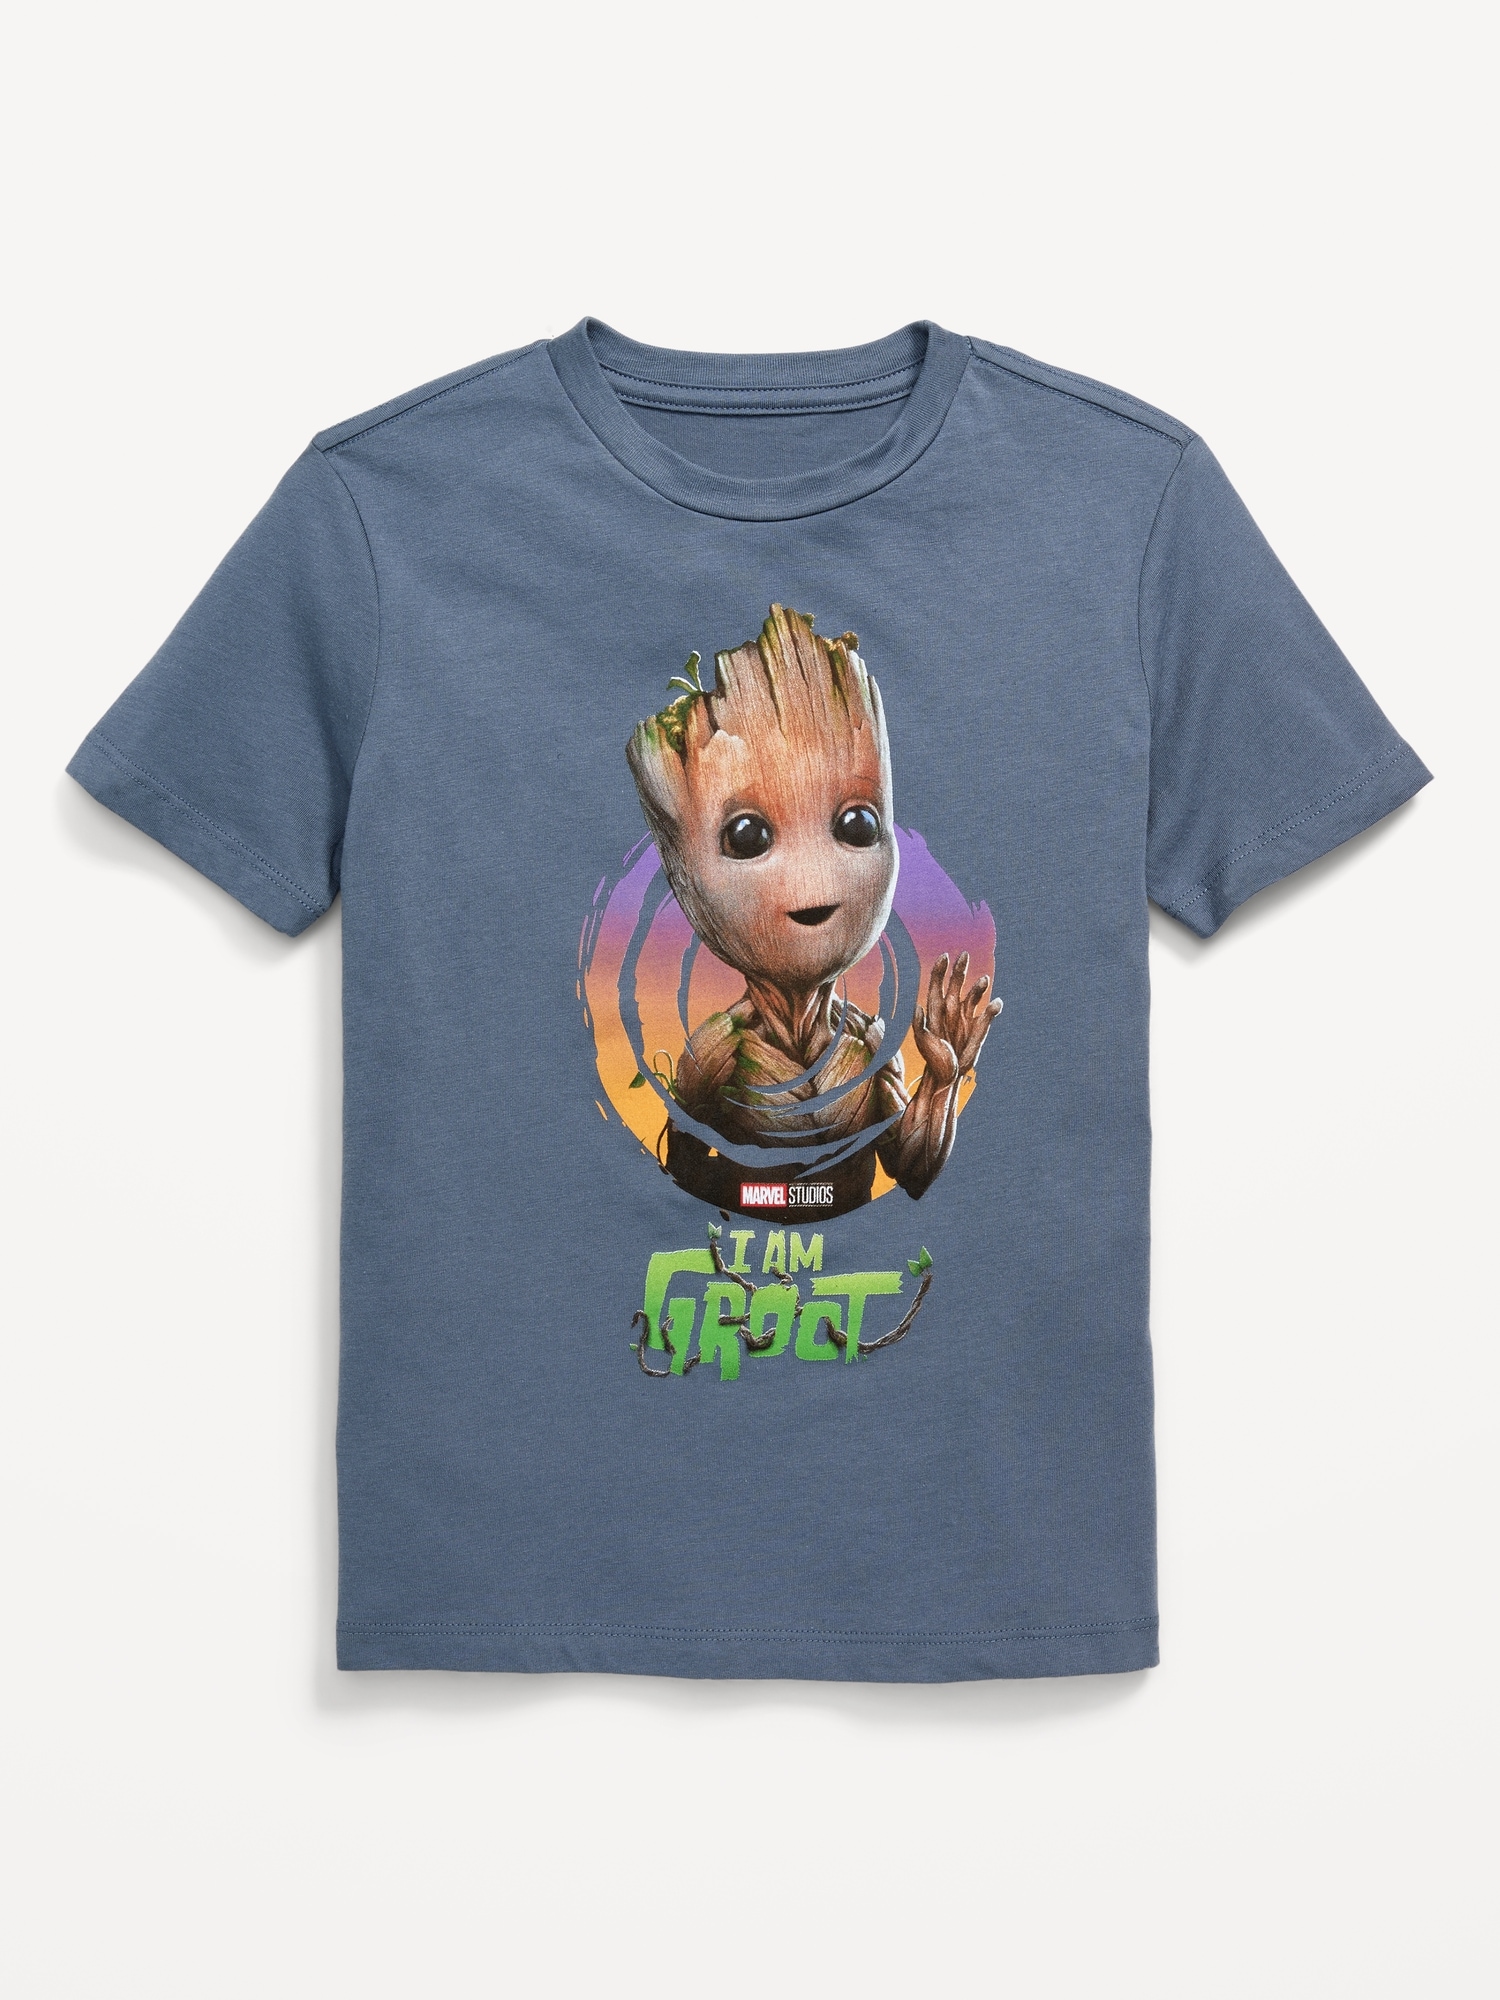 Gender-Neutral Marvel™ Am Groot" Graphic T-Shirt for Kids | Navy